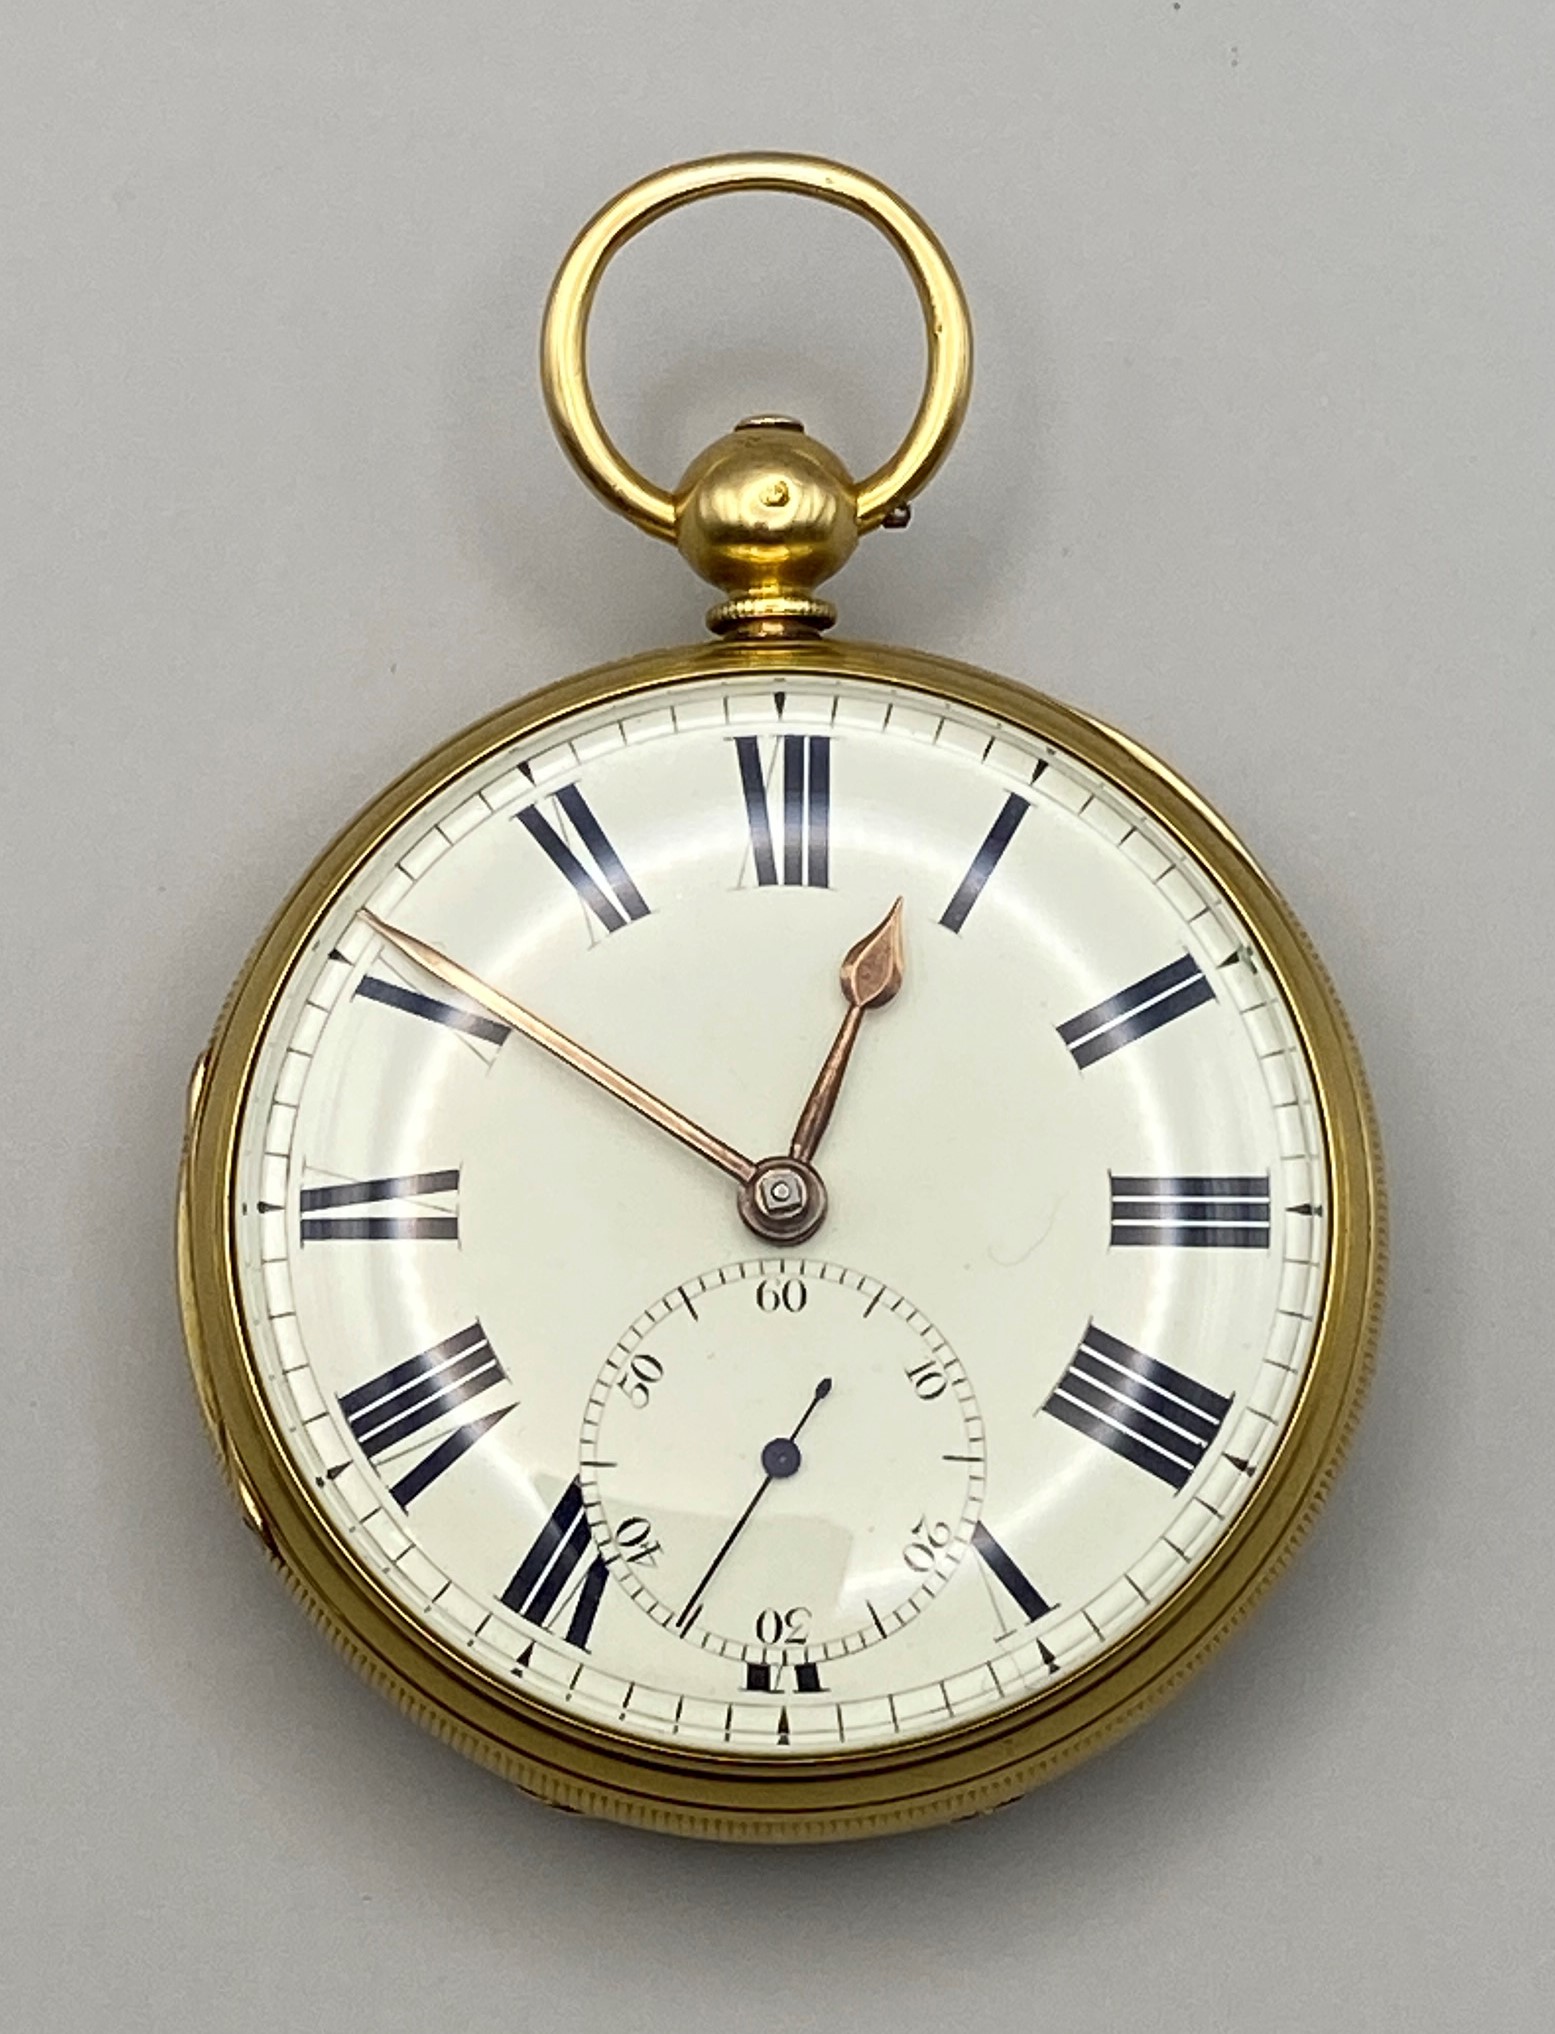 18ct Gold Fusee Pocket Watch by Gammon of Birmingham '1685', No.3584. - Image 11 of 48